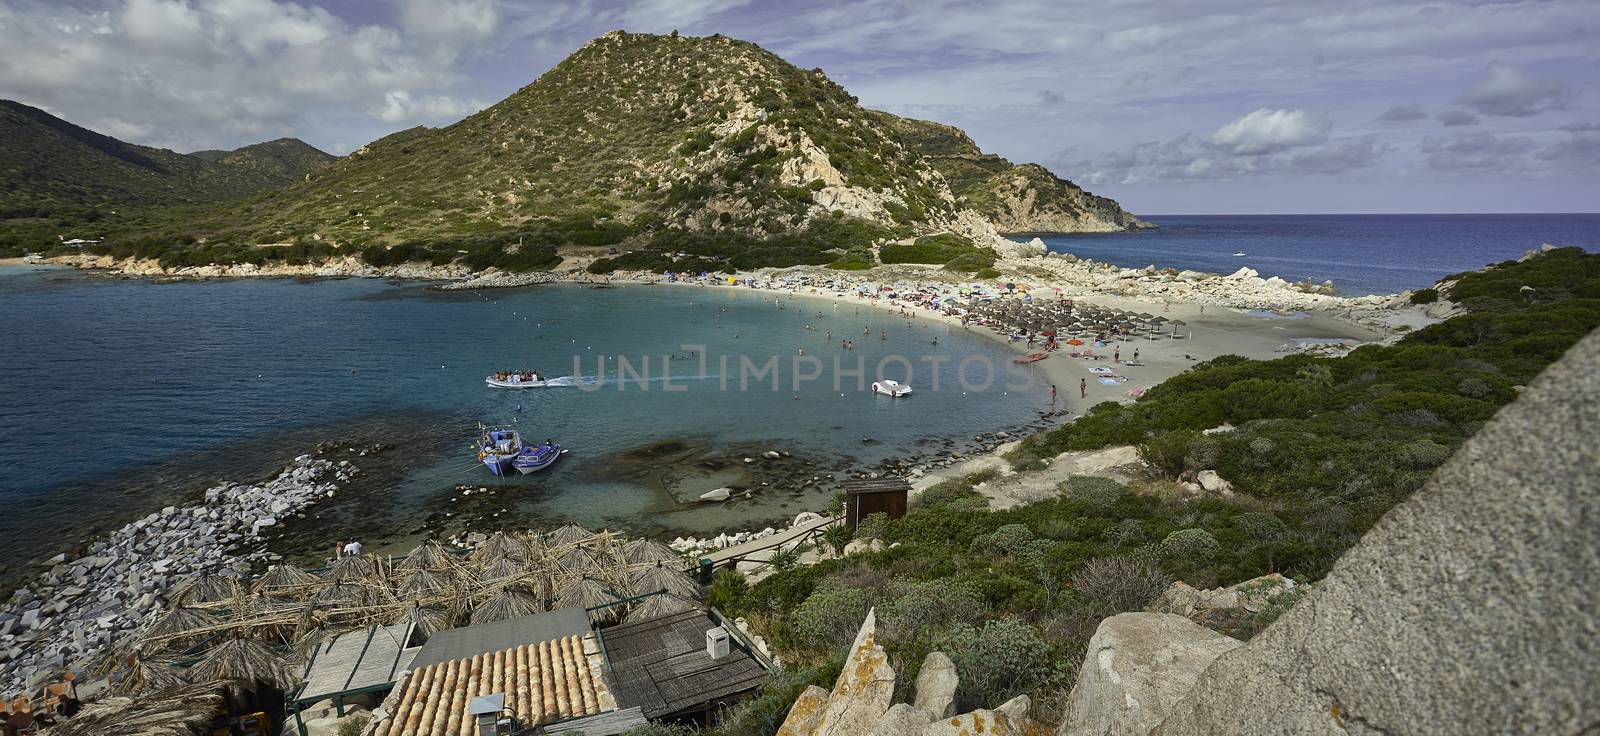 A corner of paradise: Punta Molentis beach immersed in the typical colors of Sardinian beaches on a summer day.